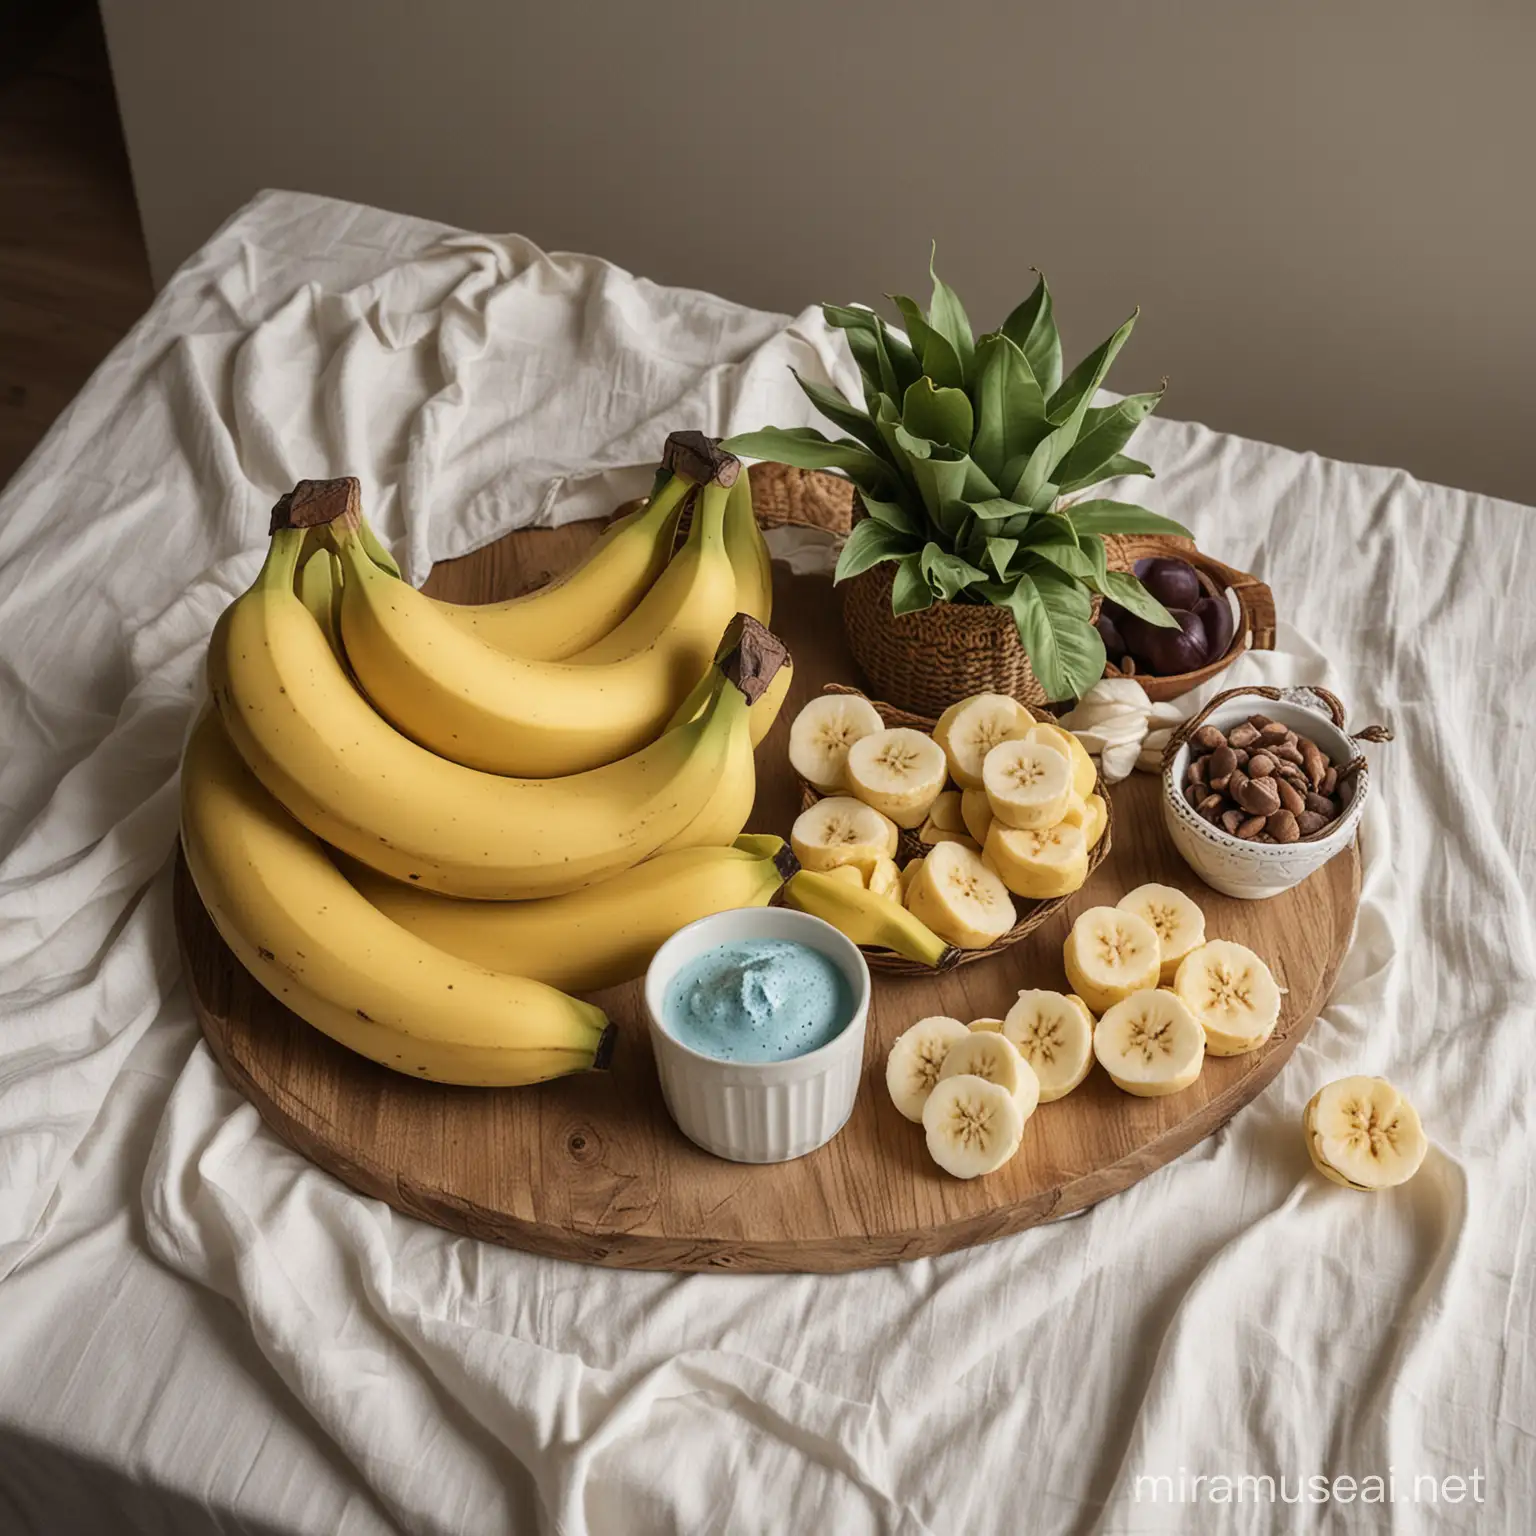 Rustic Table Setting with Blue Java Bananas and Tropical Decor